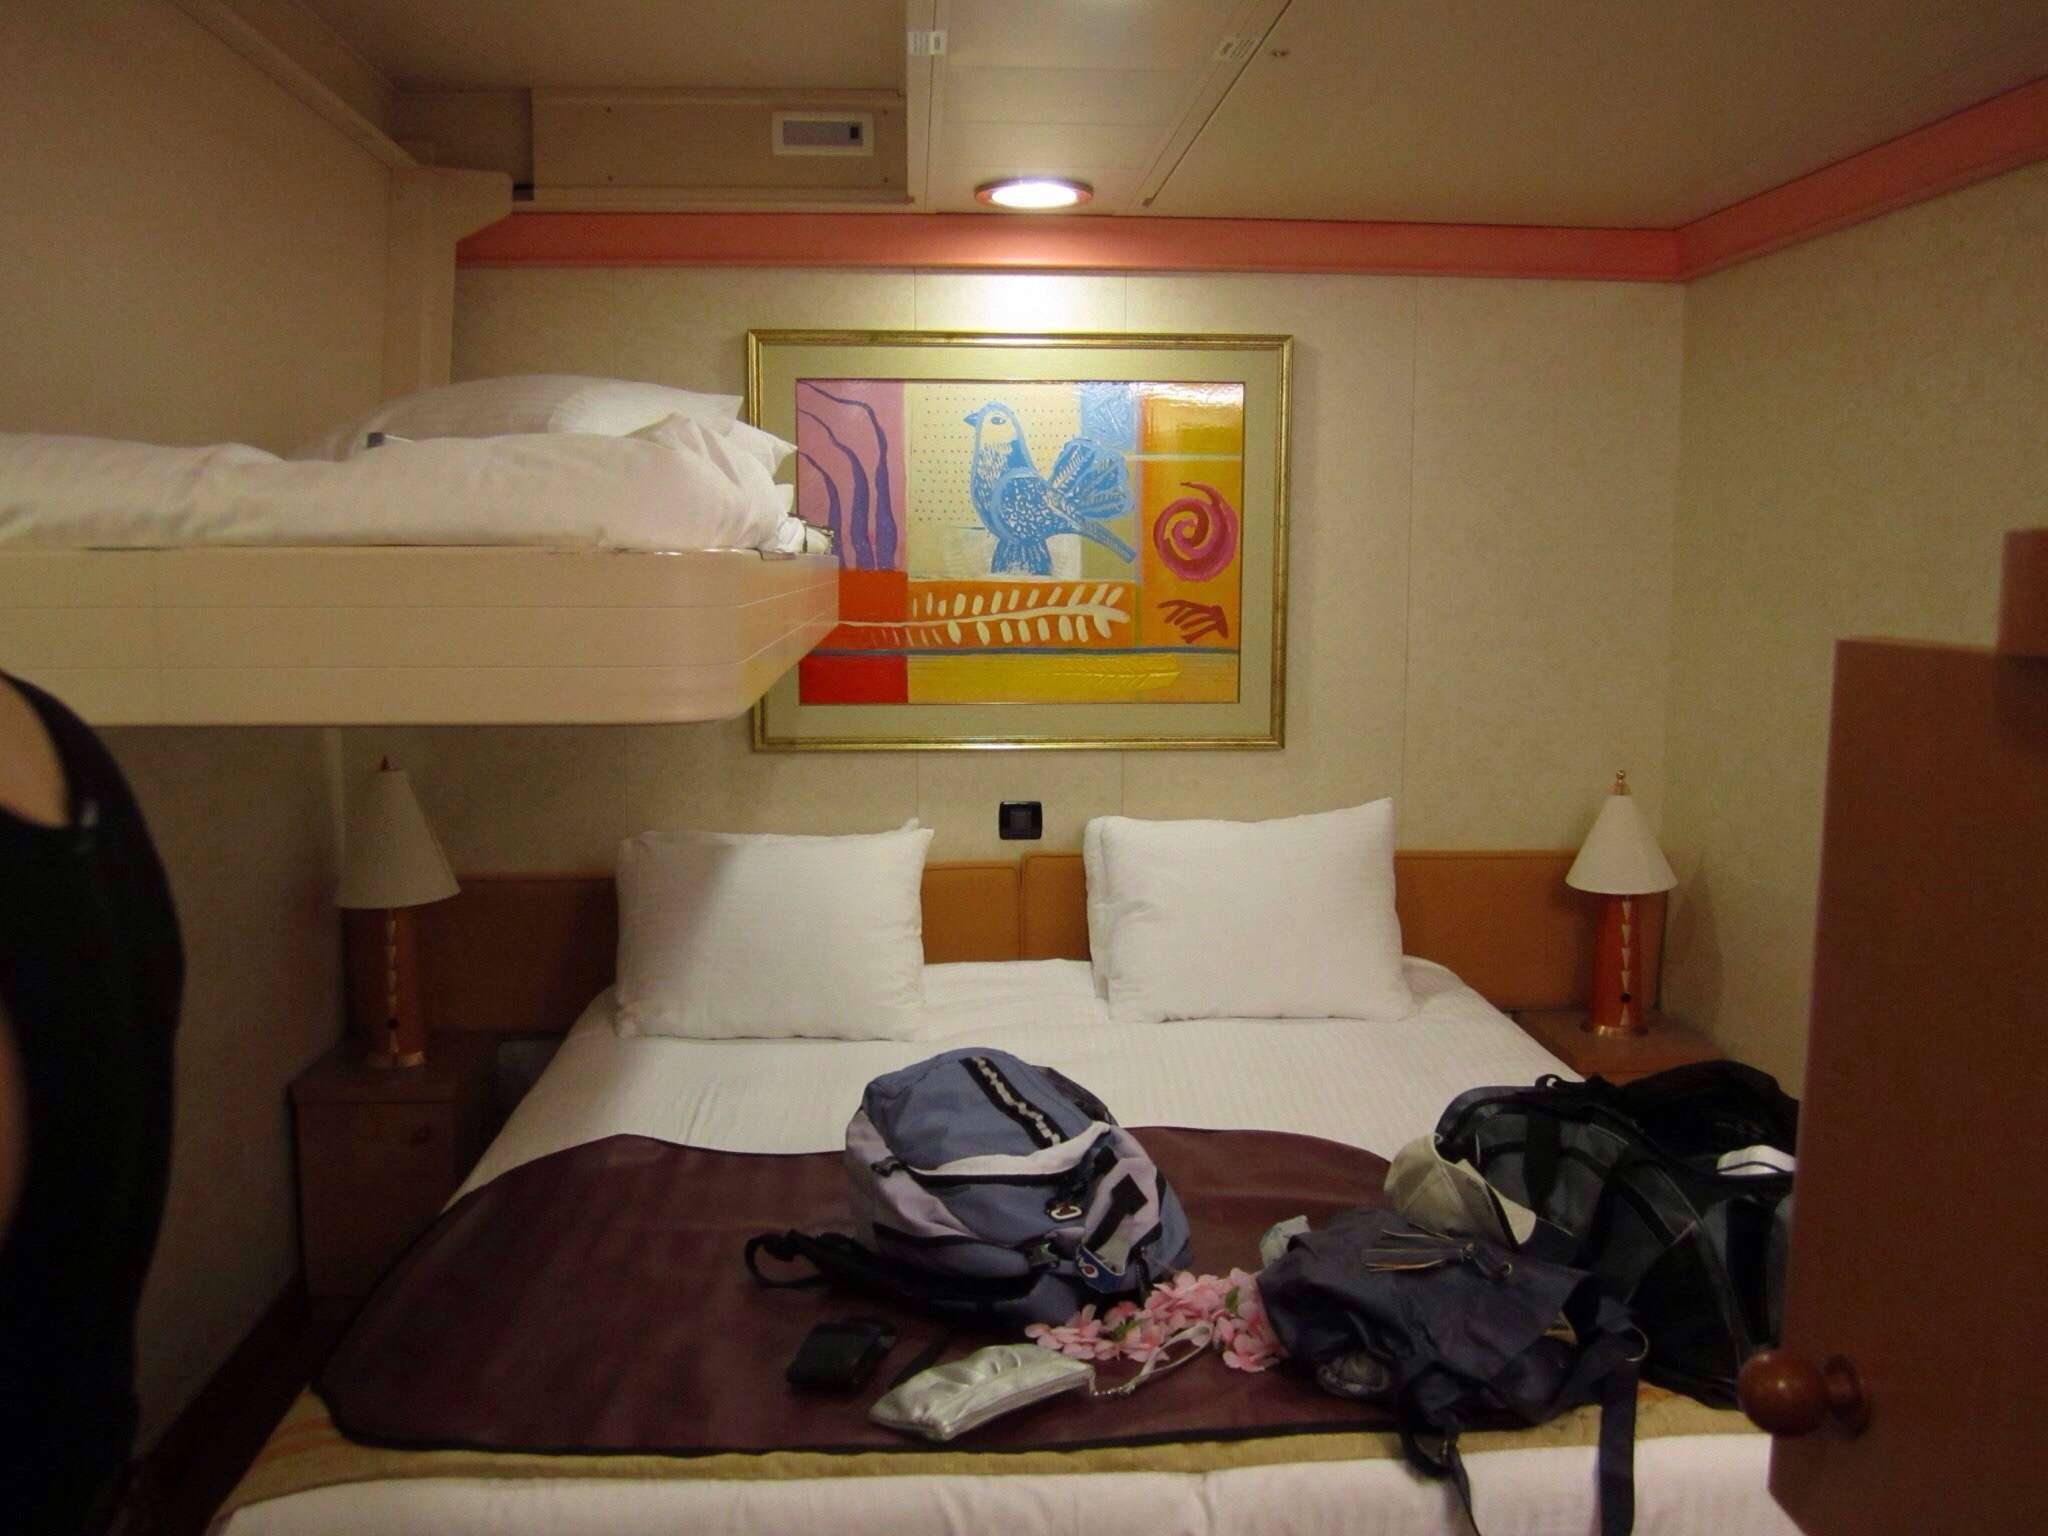 Interior Stateroom, Cabin Category 4A, Carnival Glory